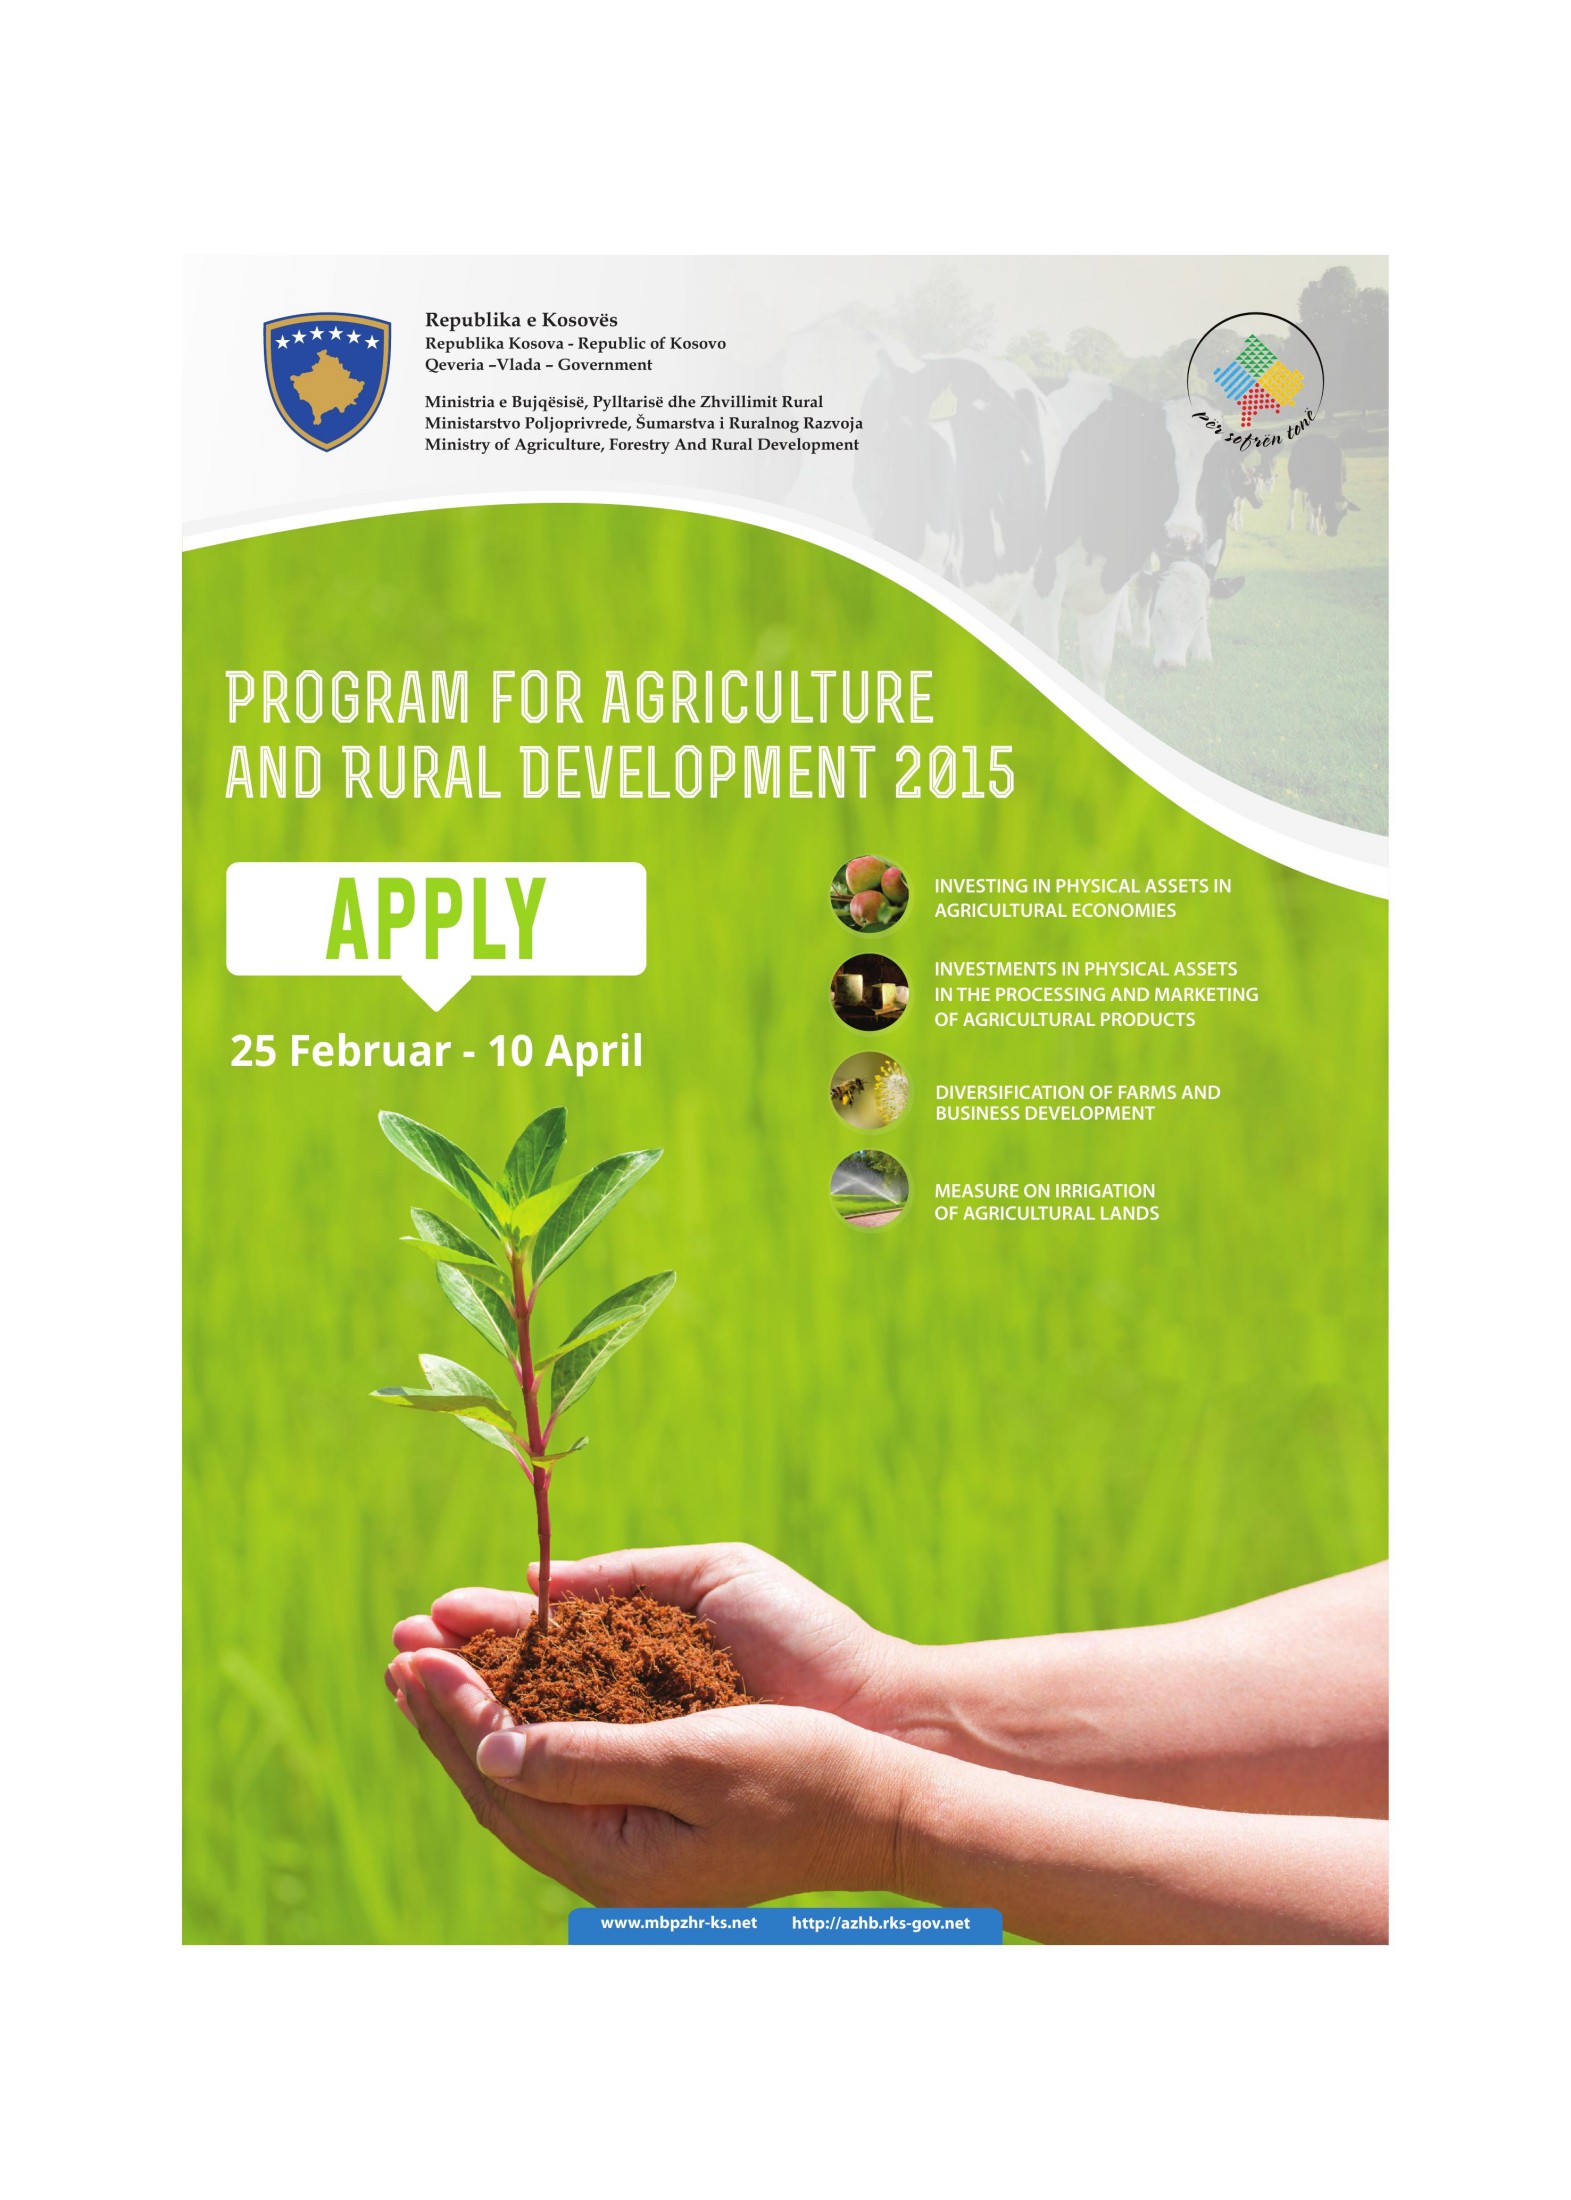 Program for Agriculture and Rural Development 2015